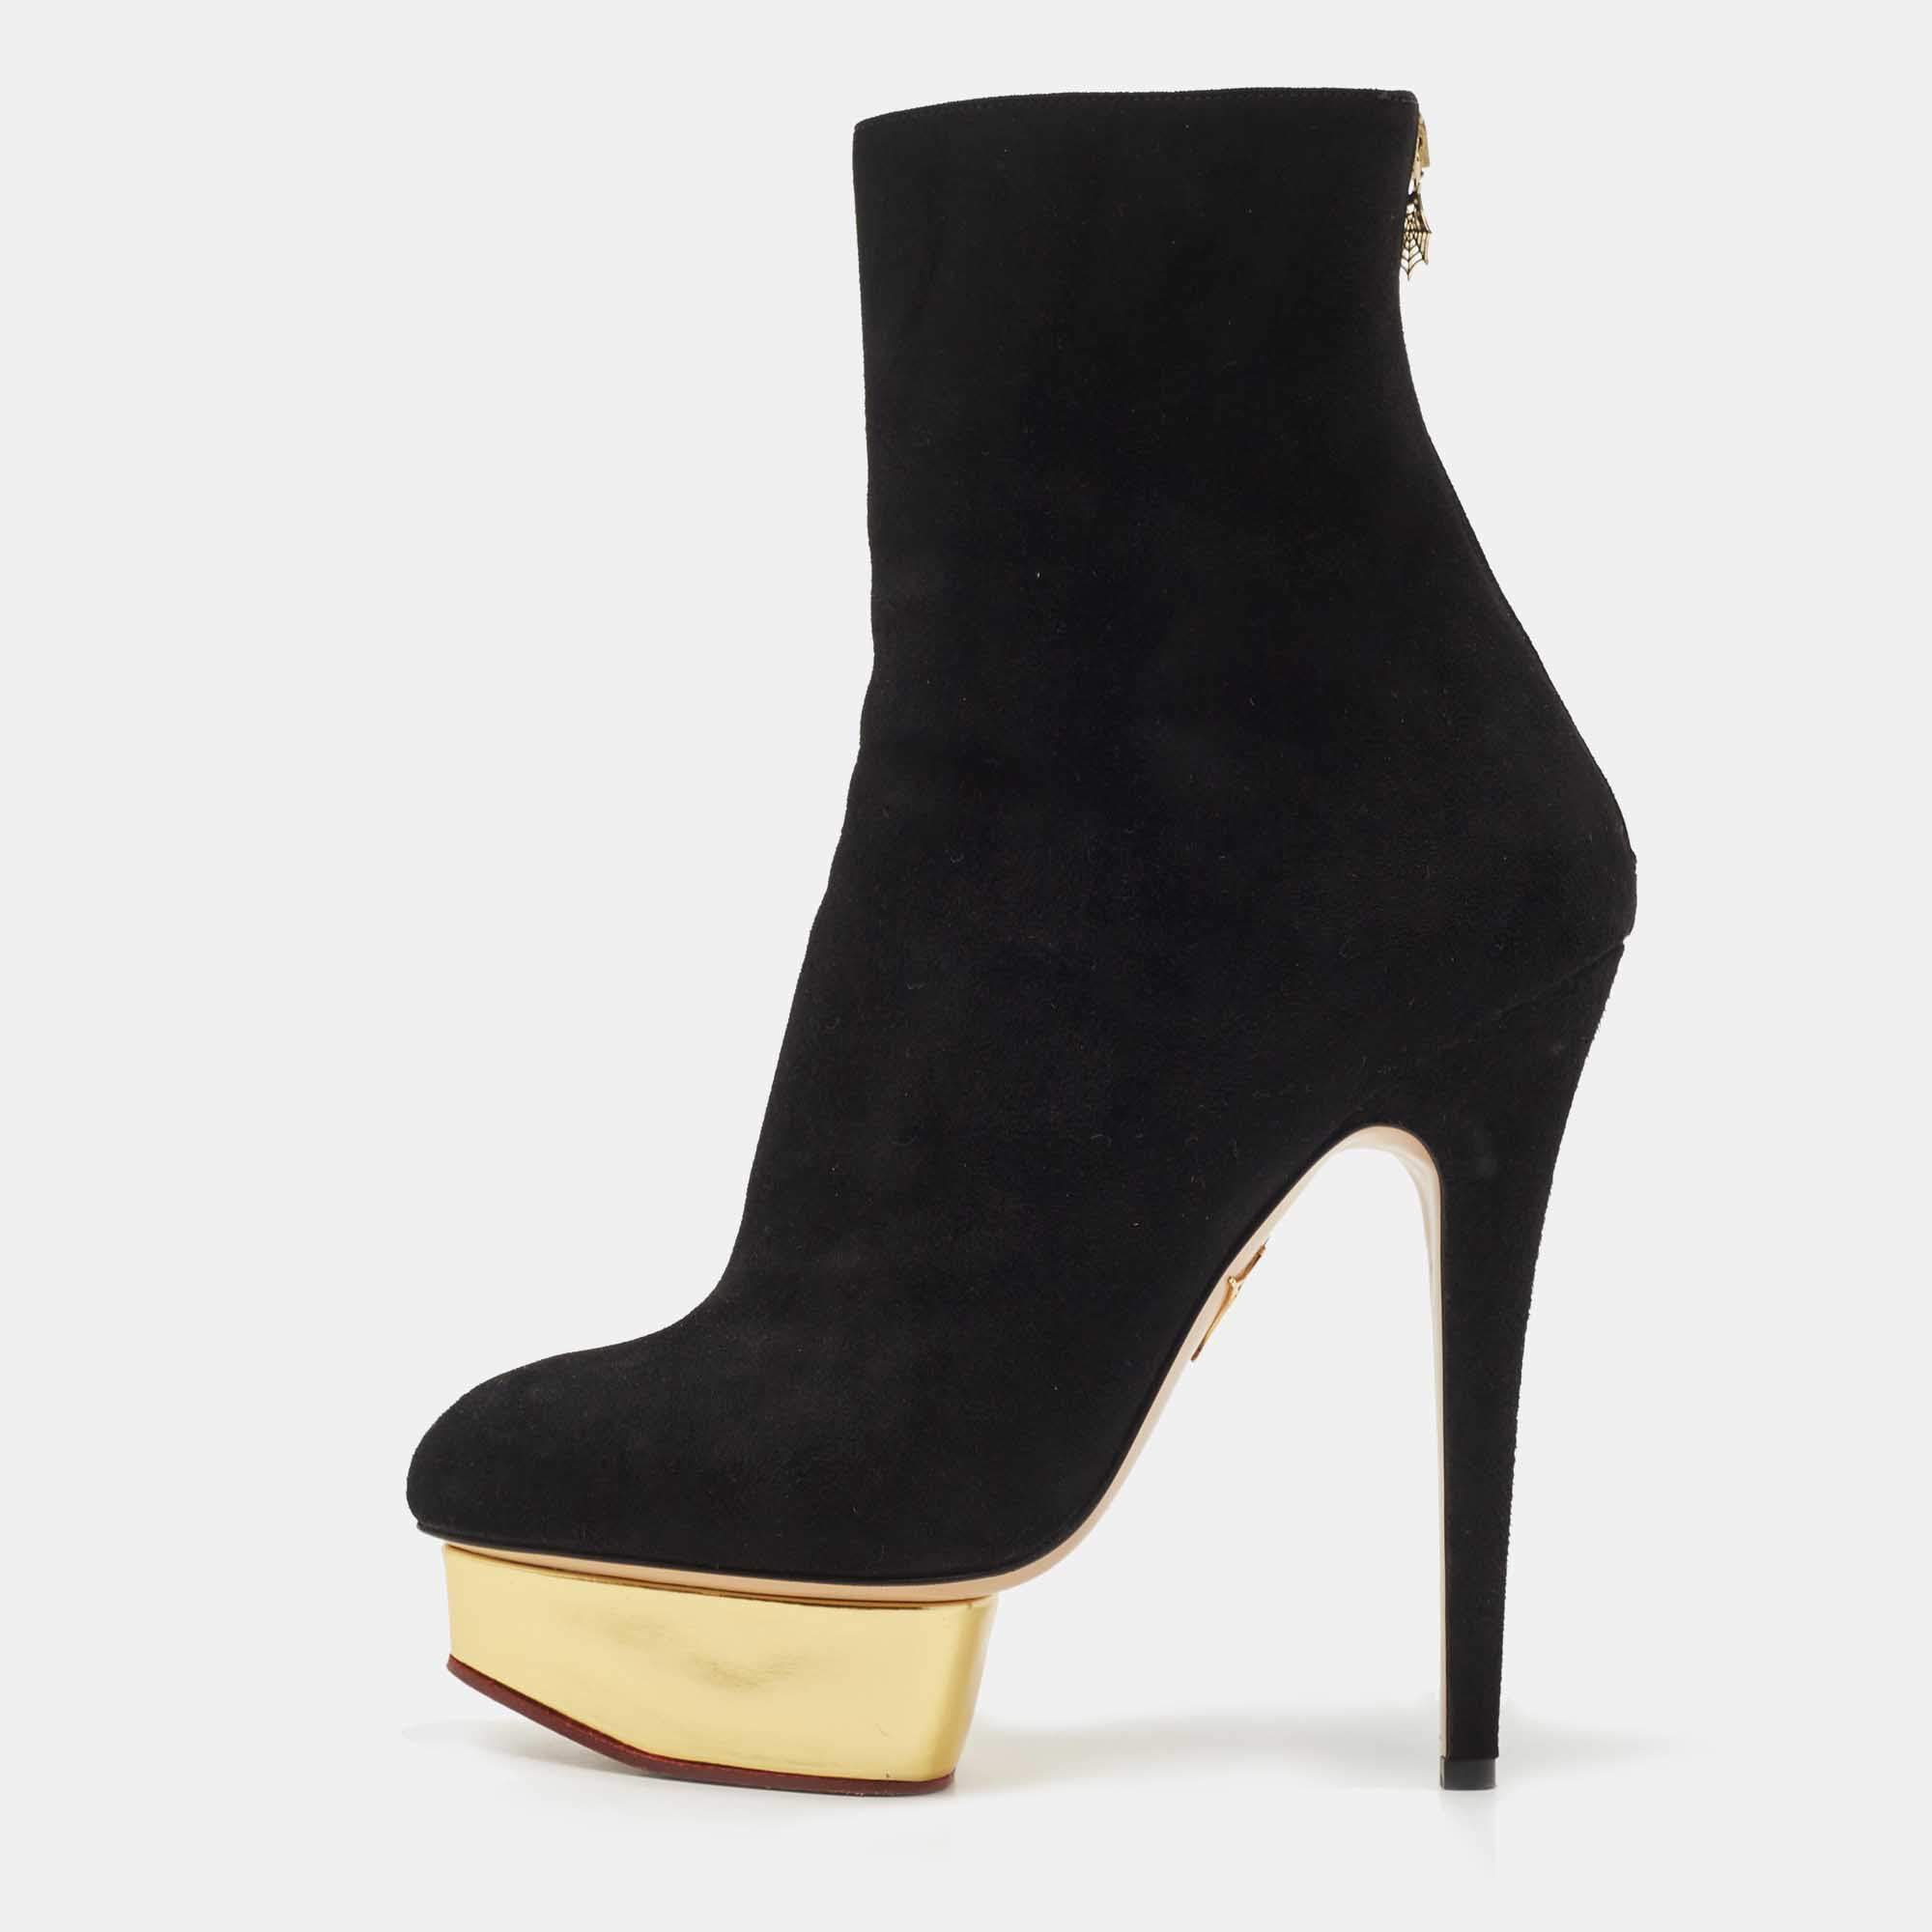 Charlotte Olympia Black Suede Platform Ankle Booties Size 39